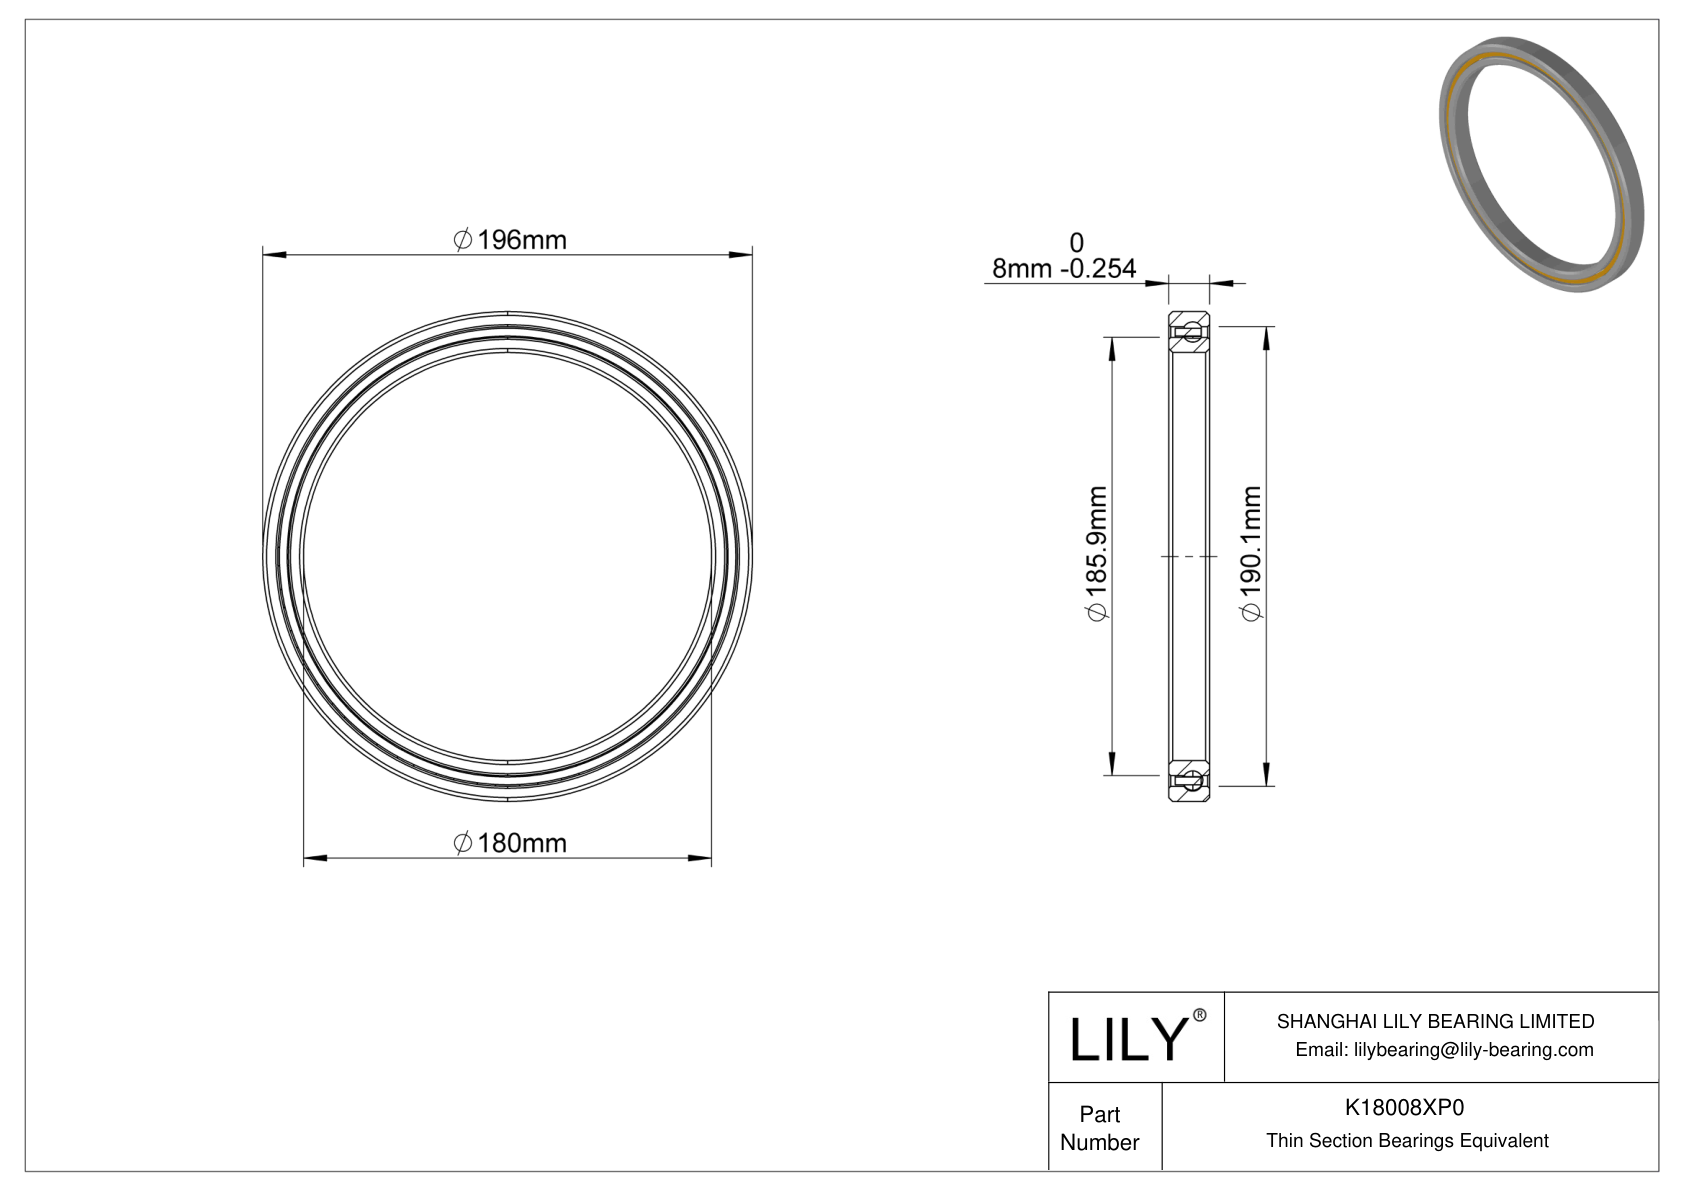 K18008XP0 Constant Section (CS) Bearings cad drawing